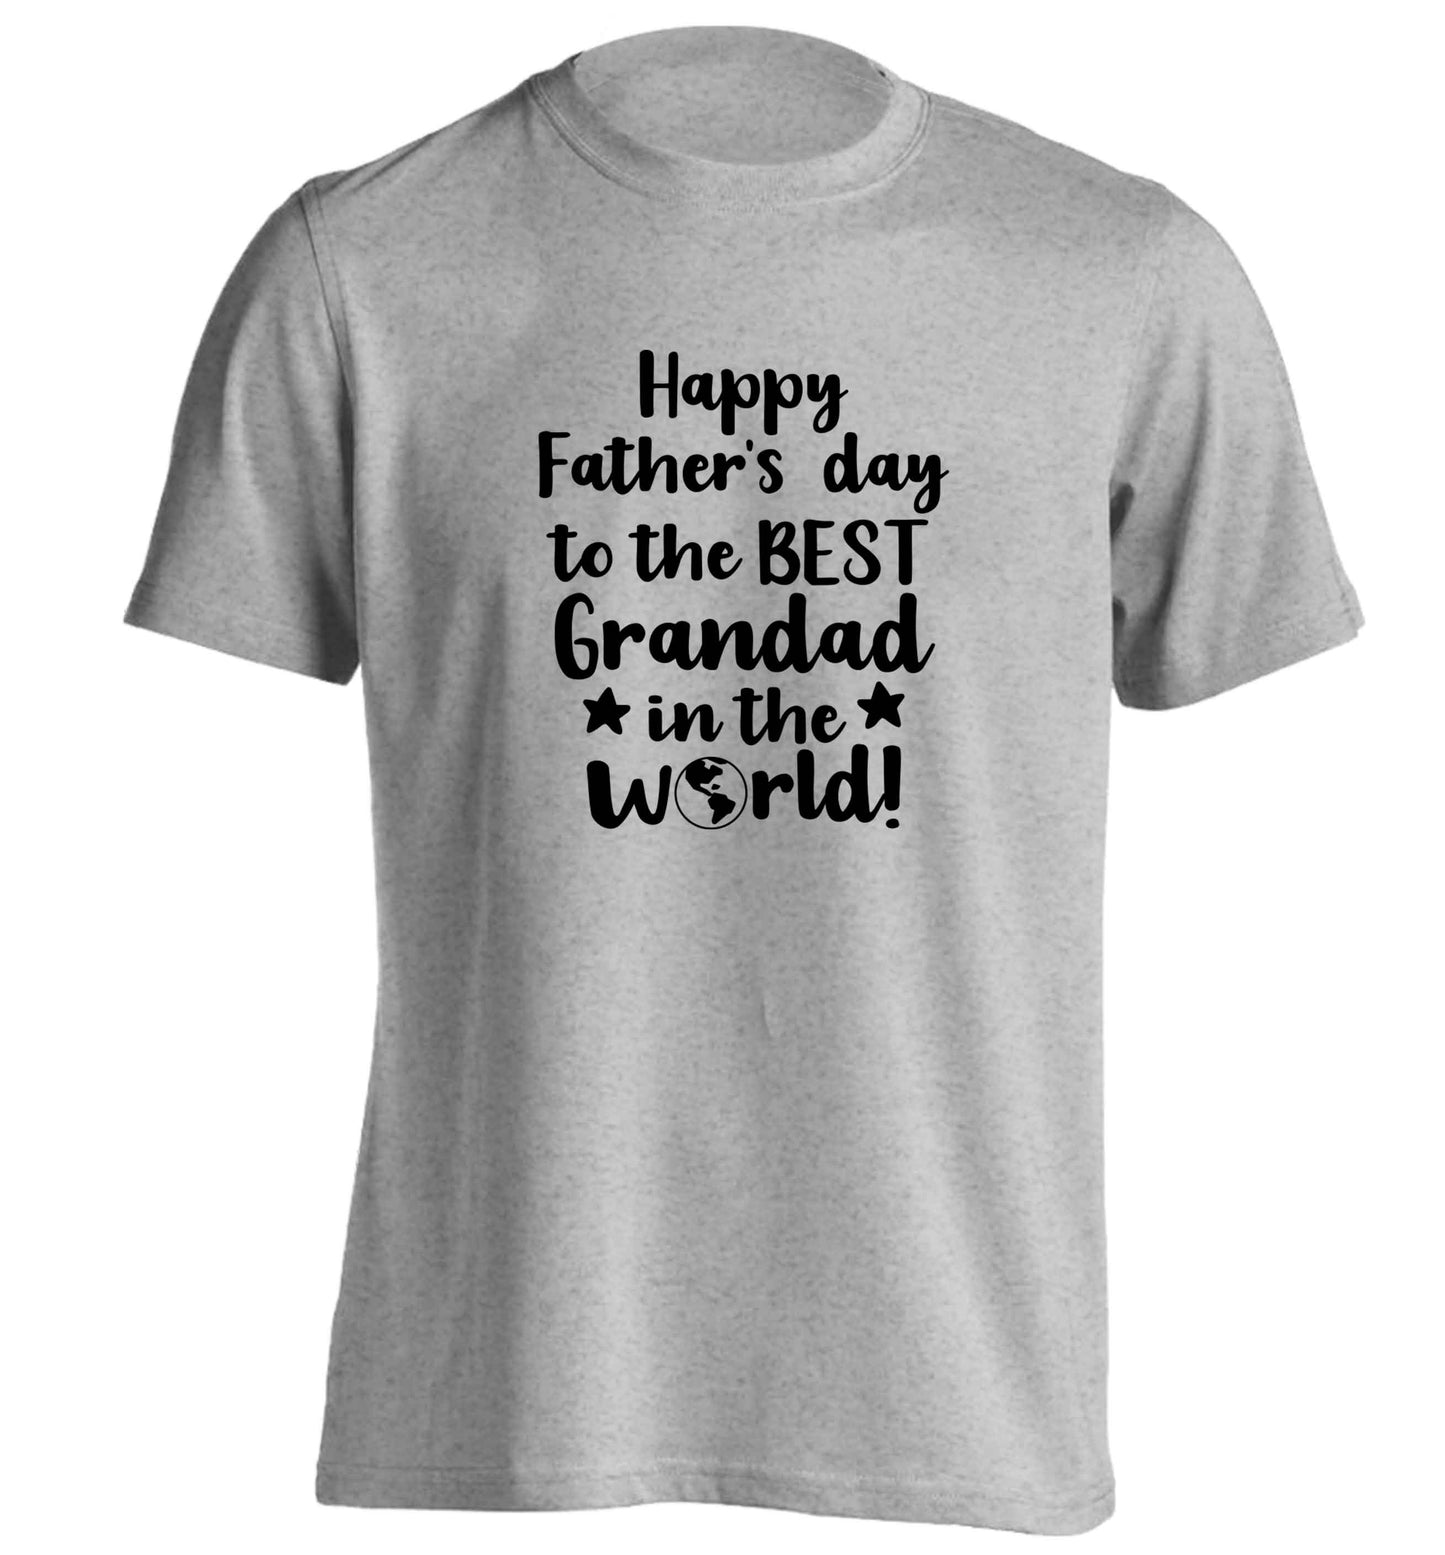 Happy Father's day to the best grandad in the world adults unisex grey Tshirt 2XL